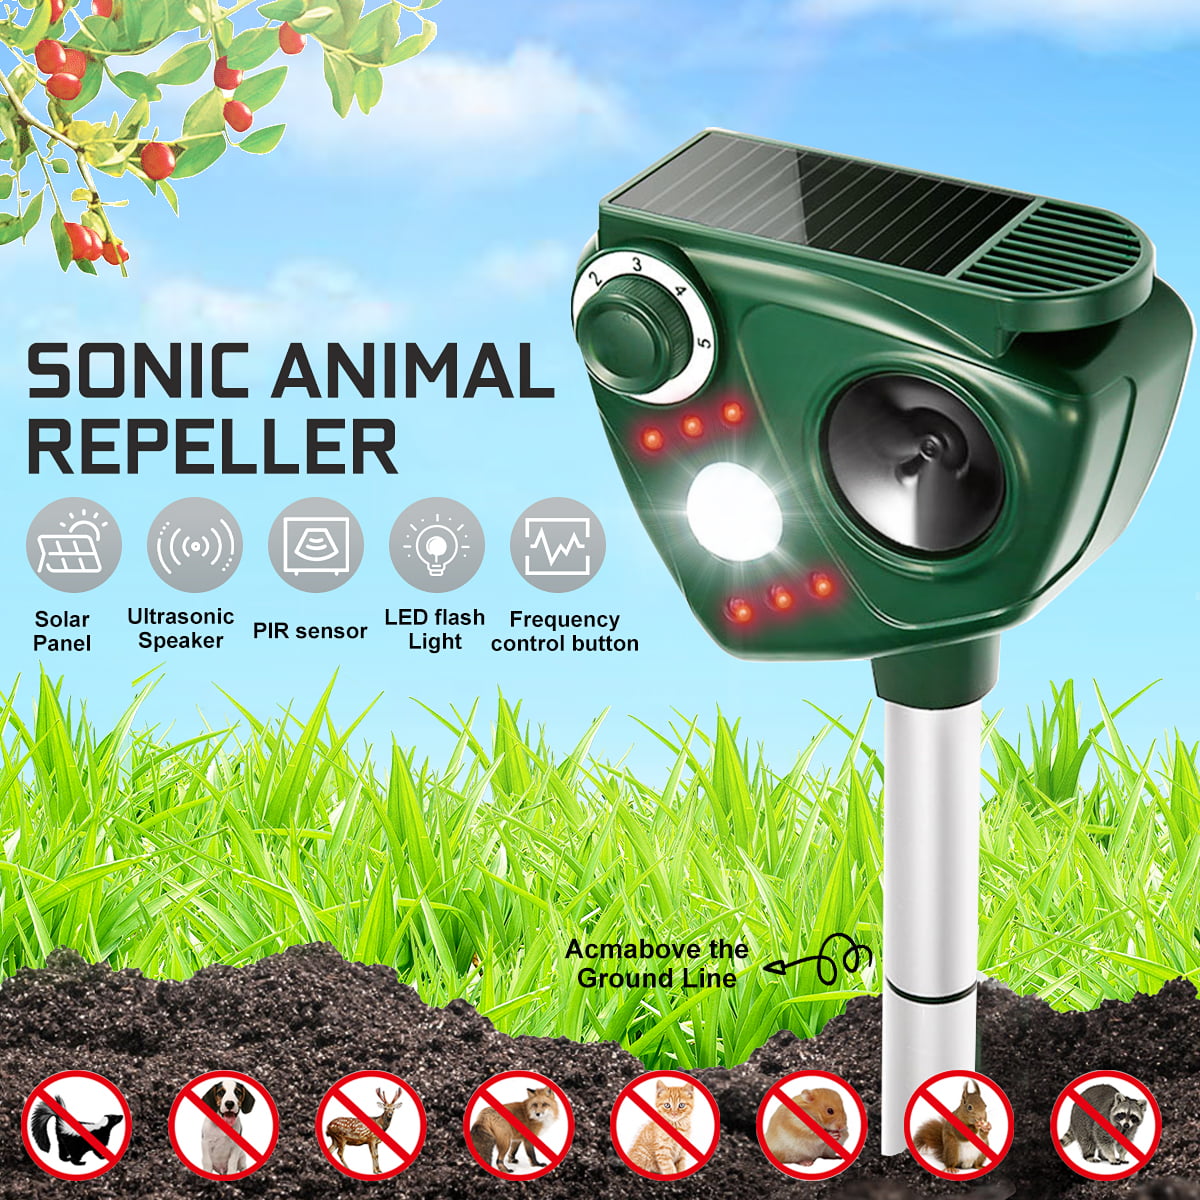 GuDoQi Ultrasonic Animal Repellent Outdoor Solar Powered Electronic Pest Repeller For Squirrel Bird Rodent Cat Bat Snake Insect Spider Mosquito 